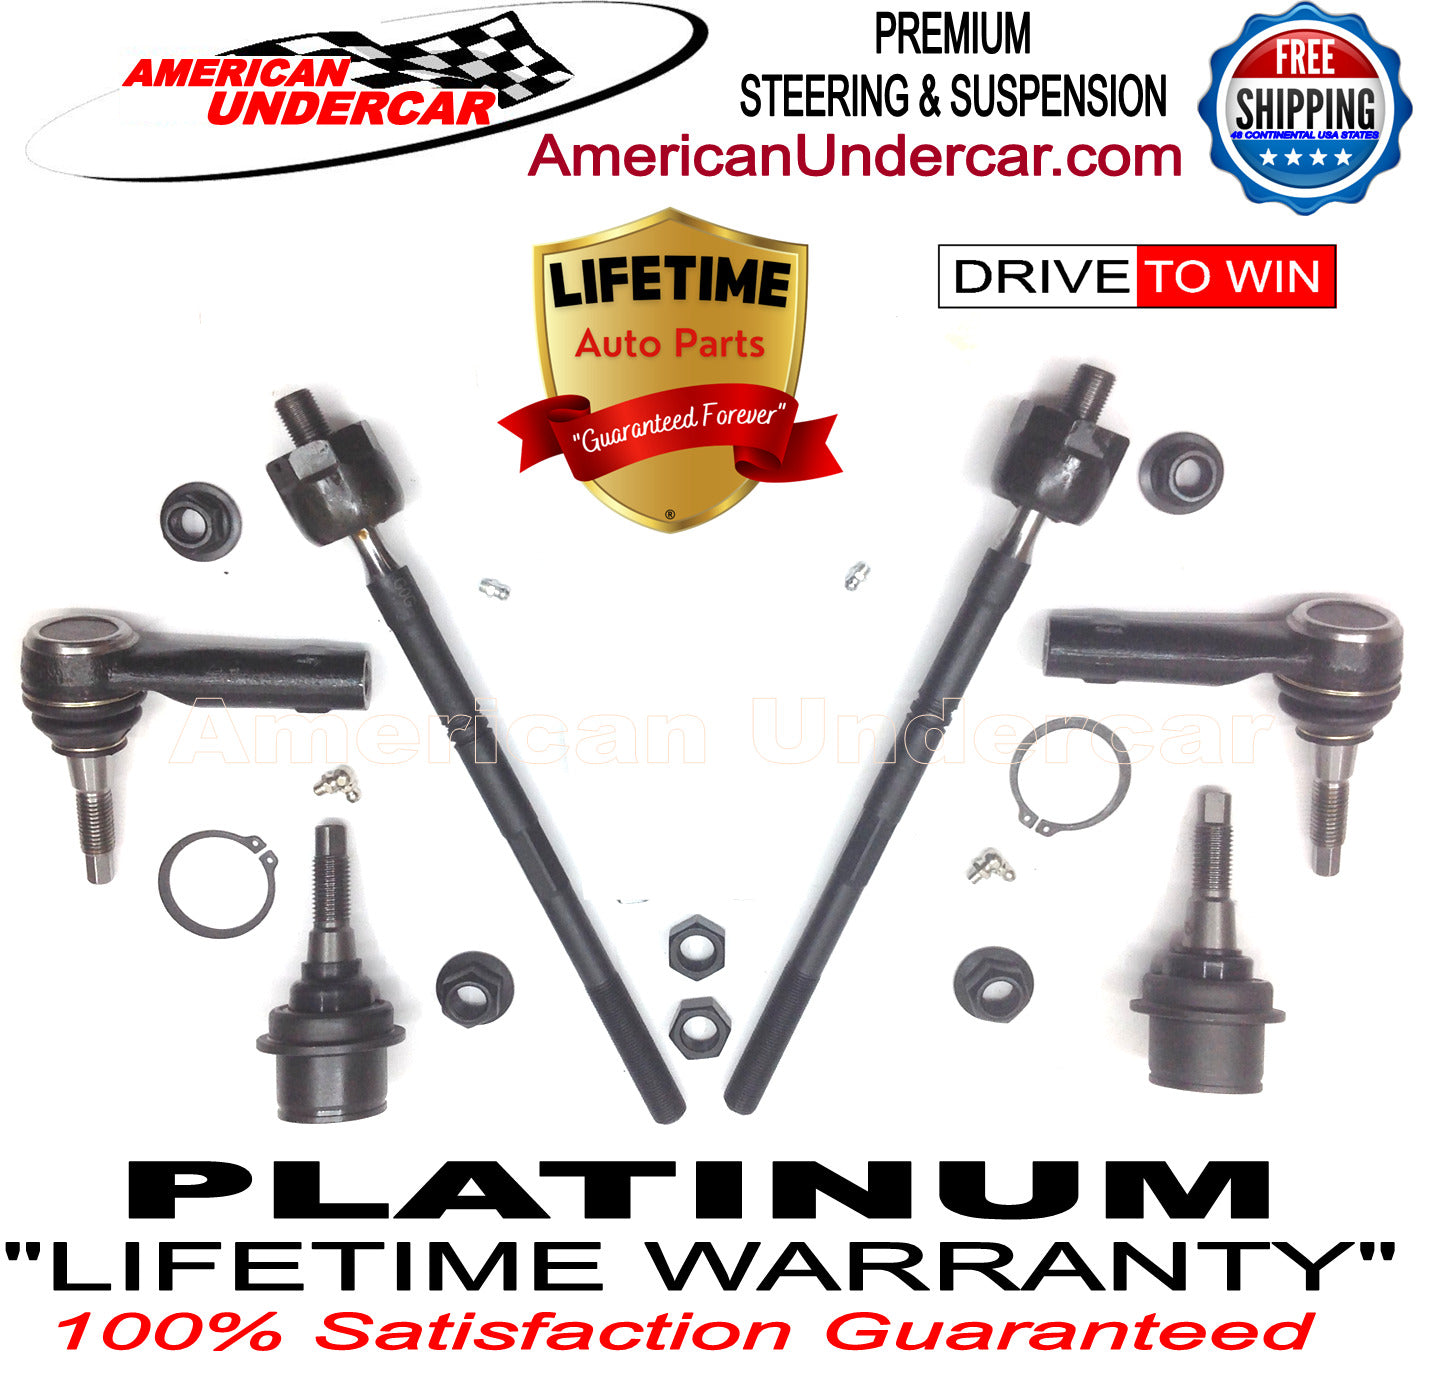 Lifetime Lower Ball Joints Tie Rod Steering Kit for 2004-2008 Ford F150 2WD